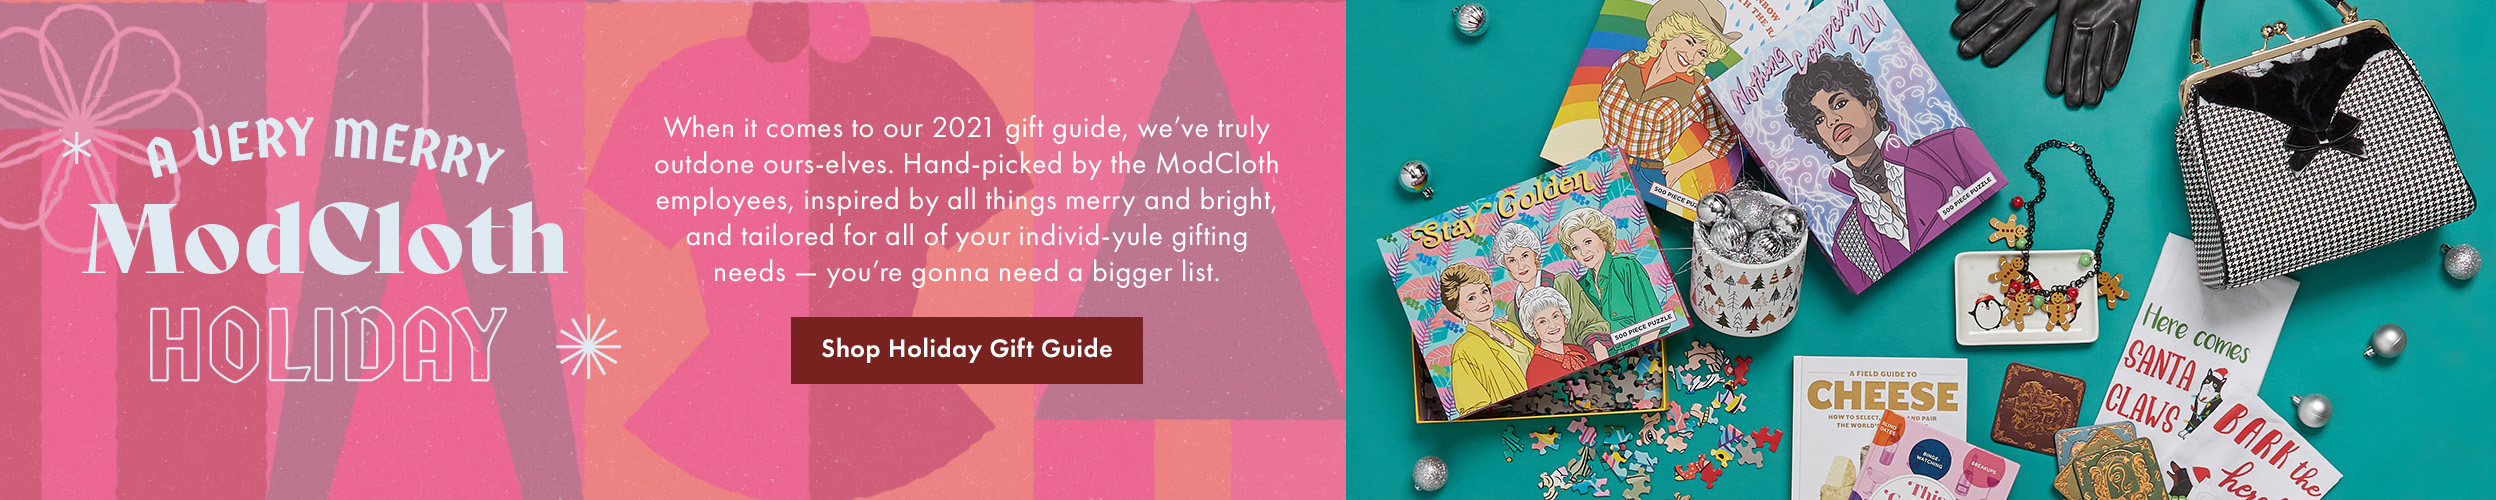 ModCloth Holiday Gift Guide category banner